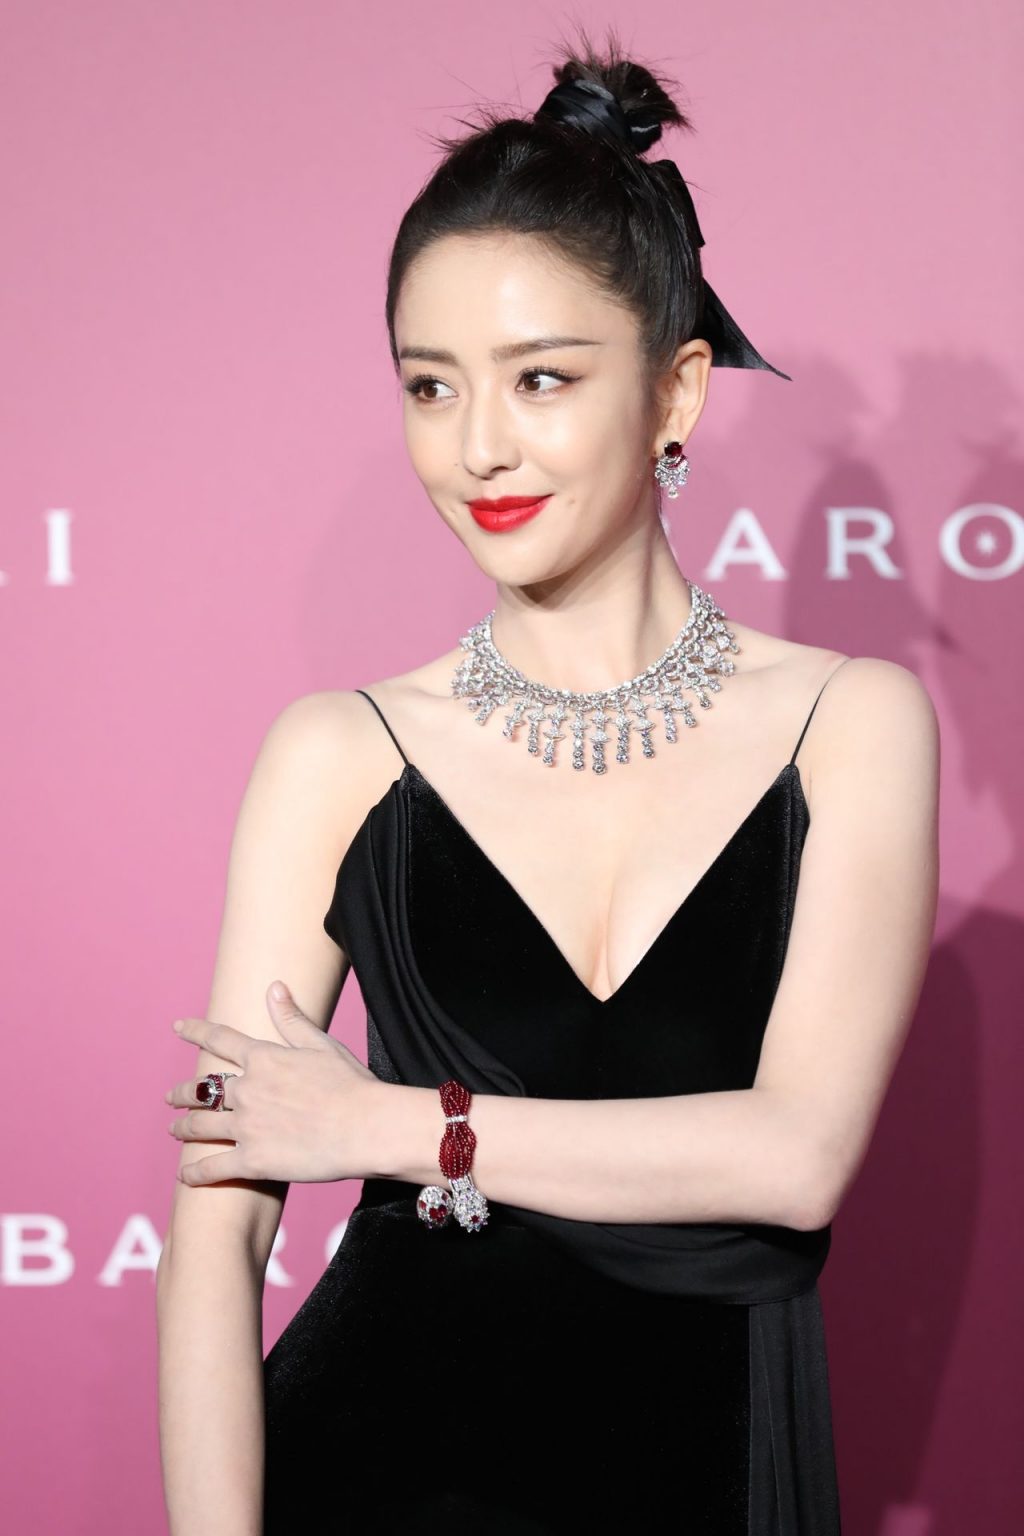 Tong Liya Shows Off Her Cleavage the Bulgari Event (27 Photos)